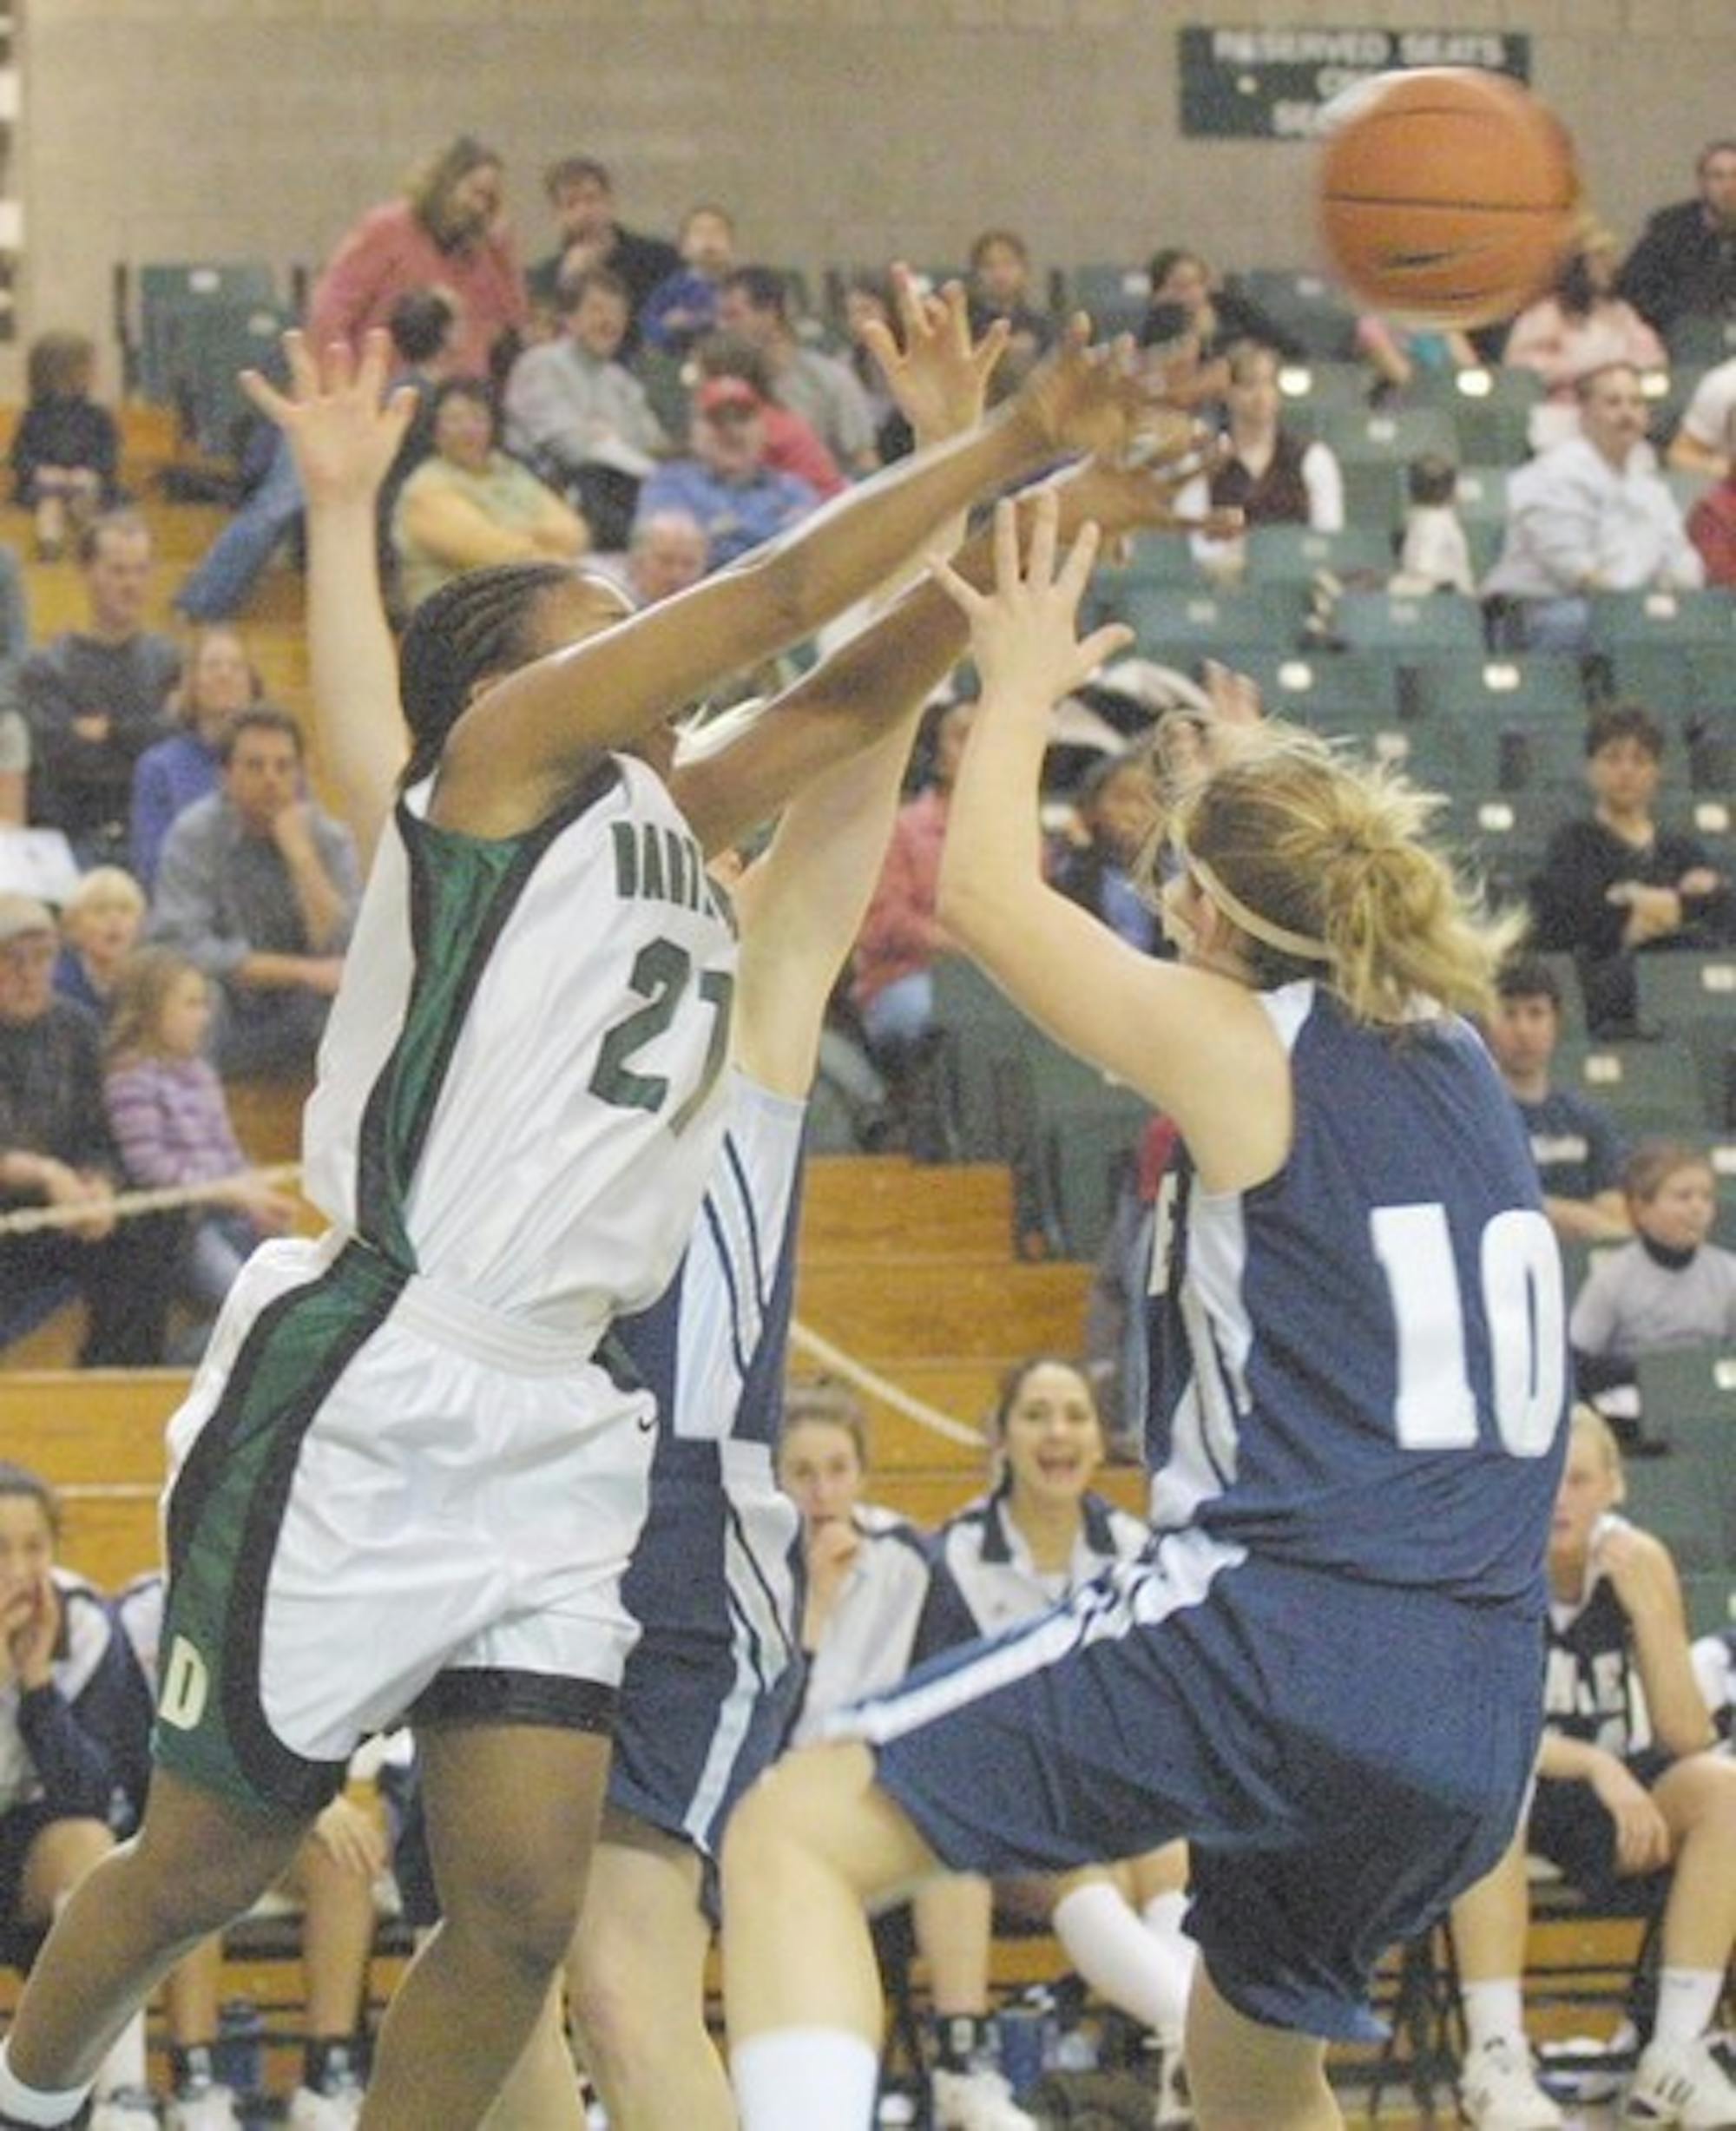 Fatima Kamara '07 fights for the ball in Dartmouth's last game against Hartford before a crowd of 730 on Nov. 30, 2004.